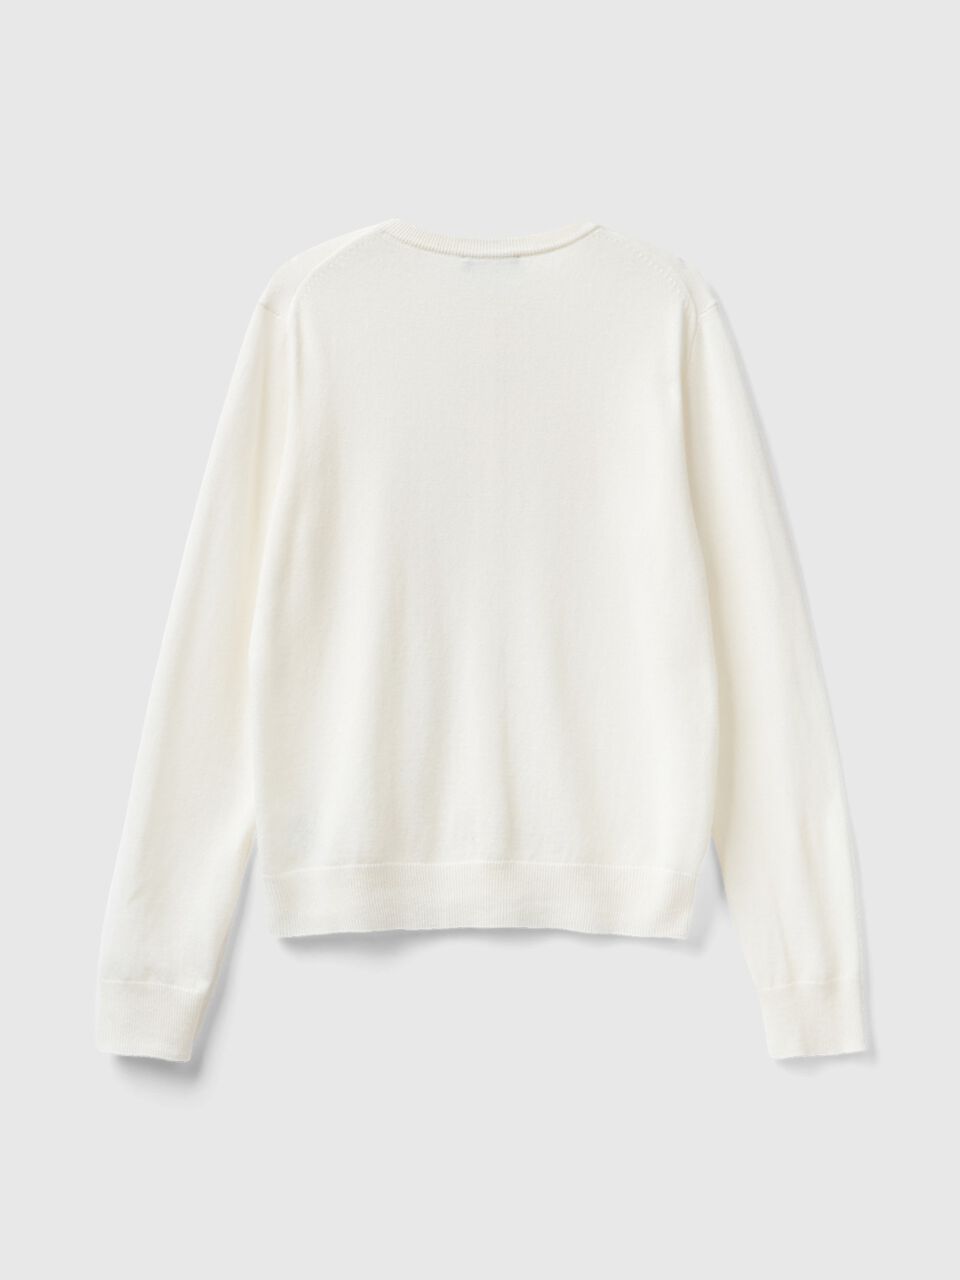 White turtleneck sweater in cashmere and wool blend